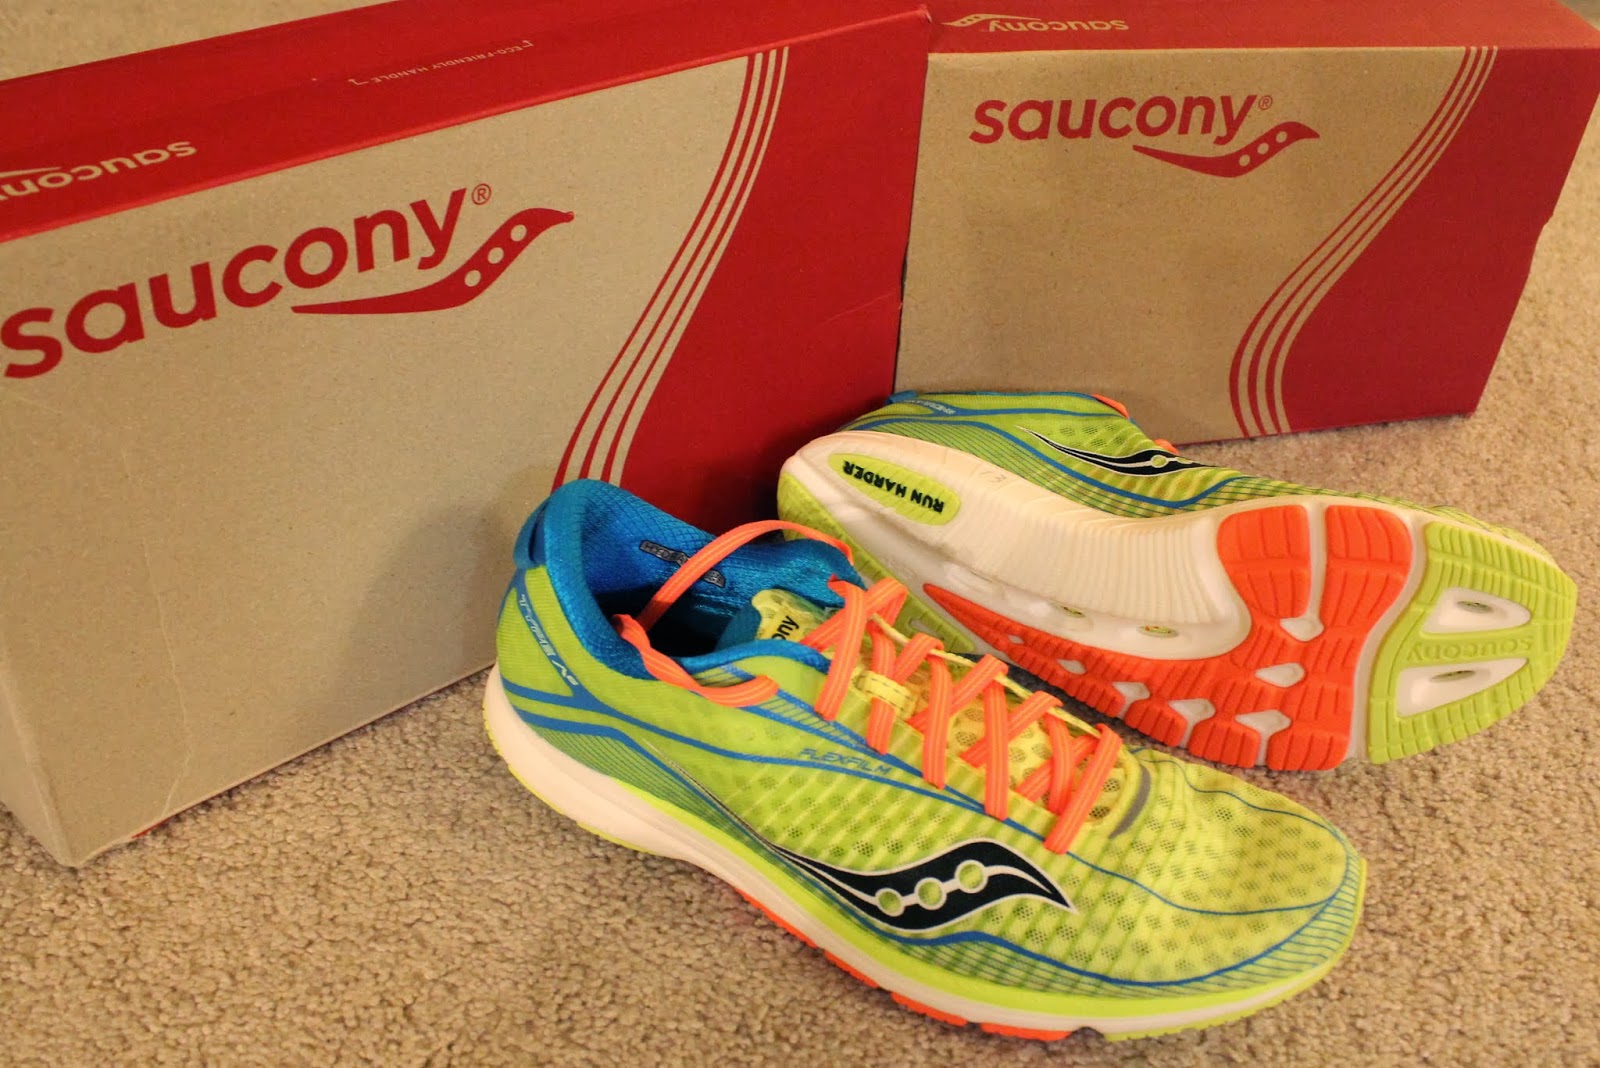 saucony type a6 weight